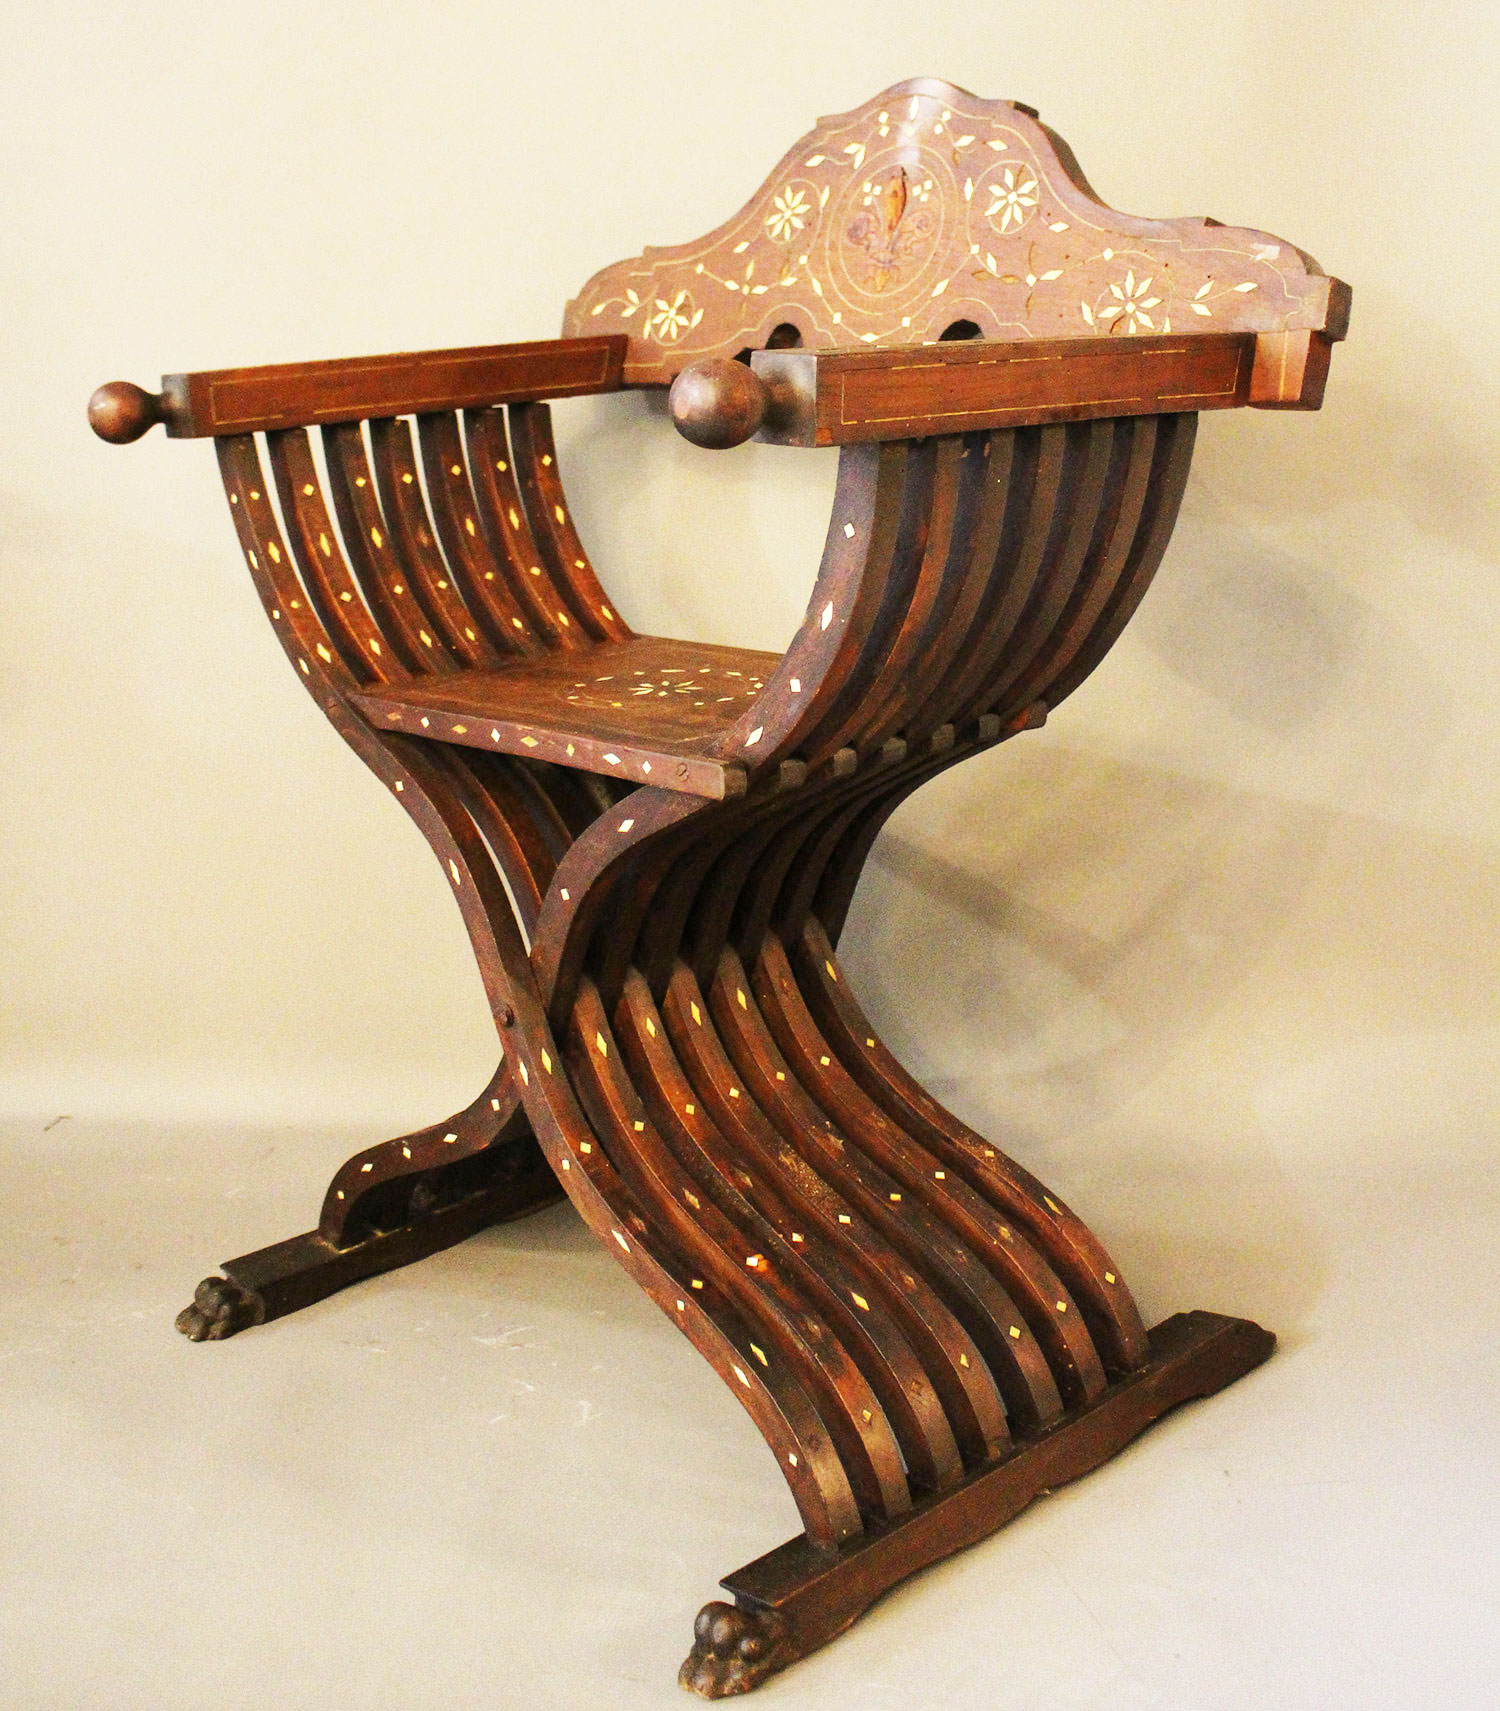 Pair of Florentine X-chairs - Image 3 of 3